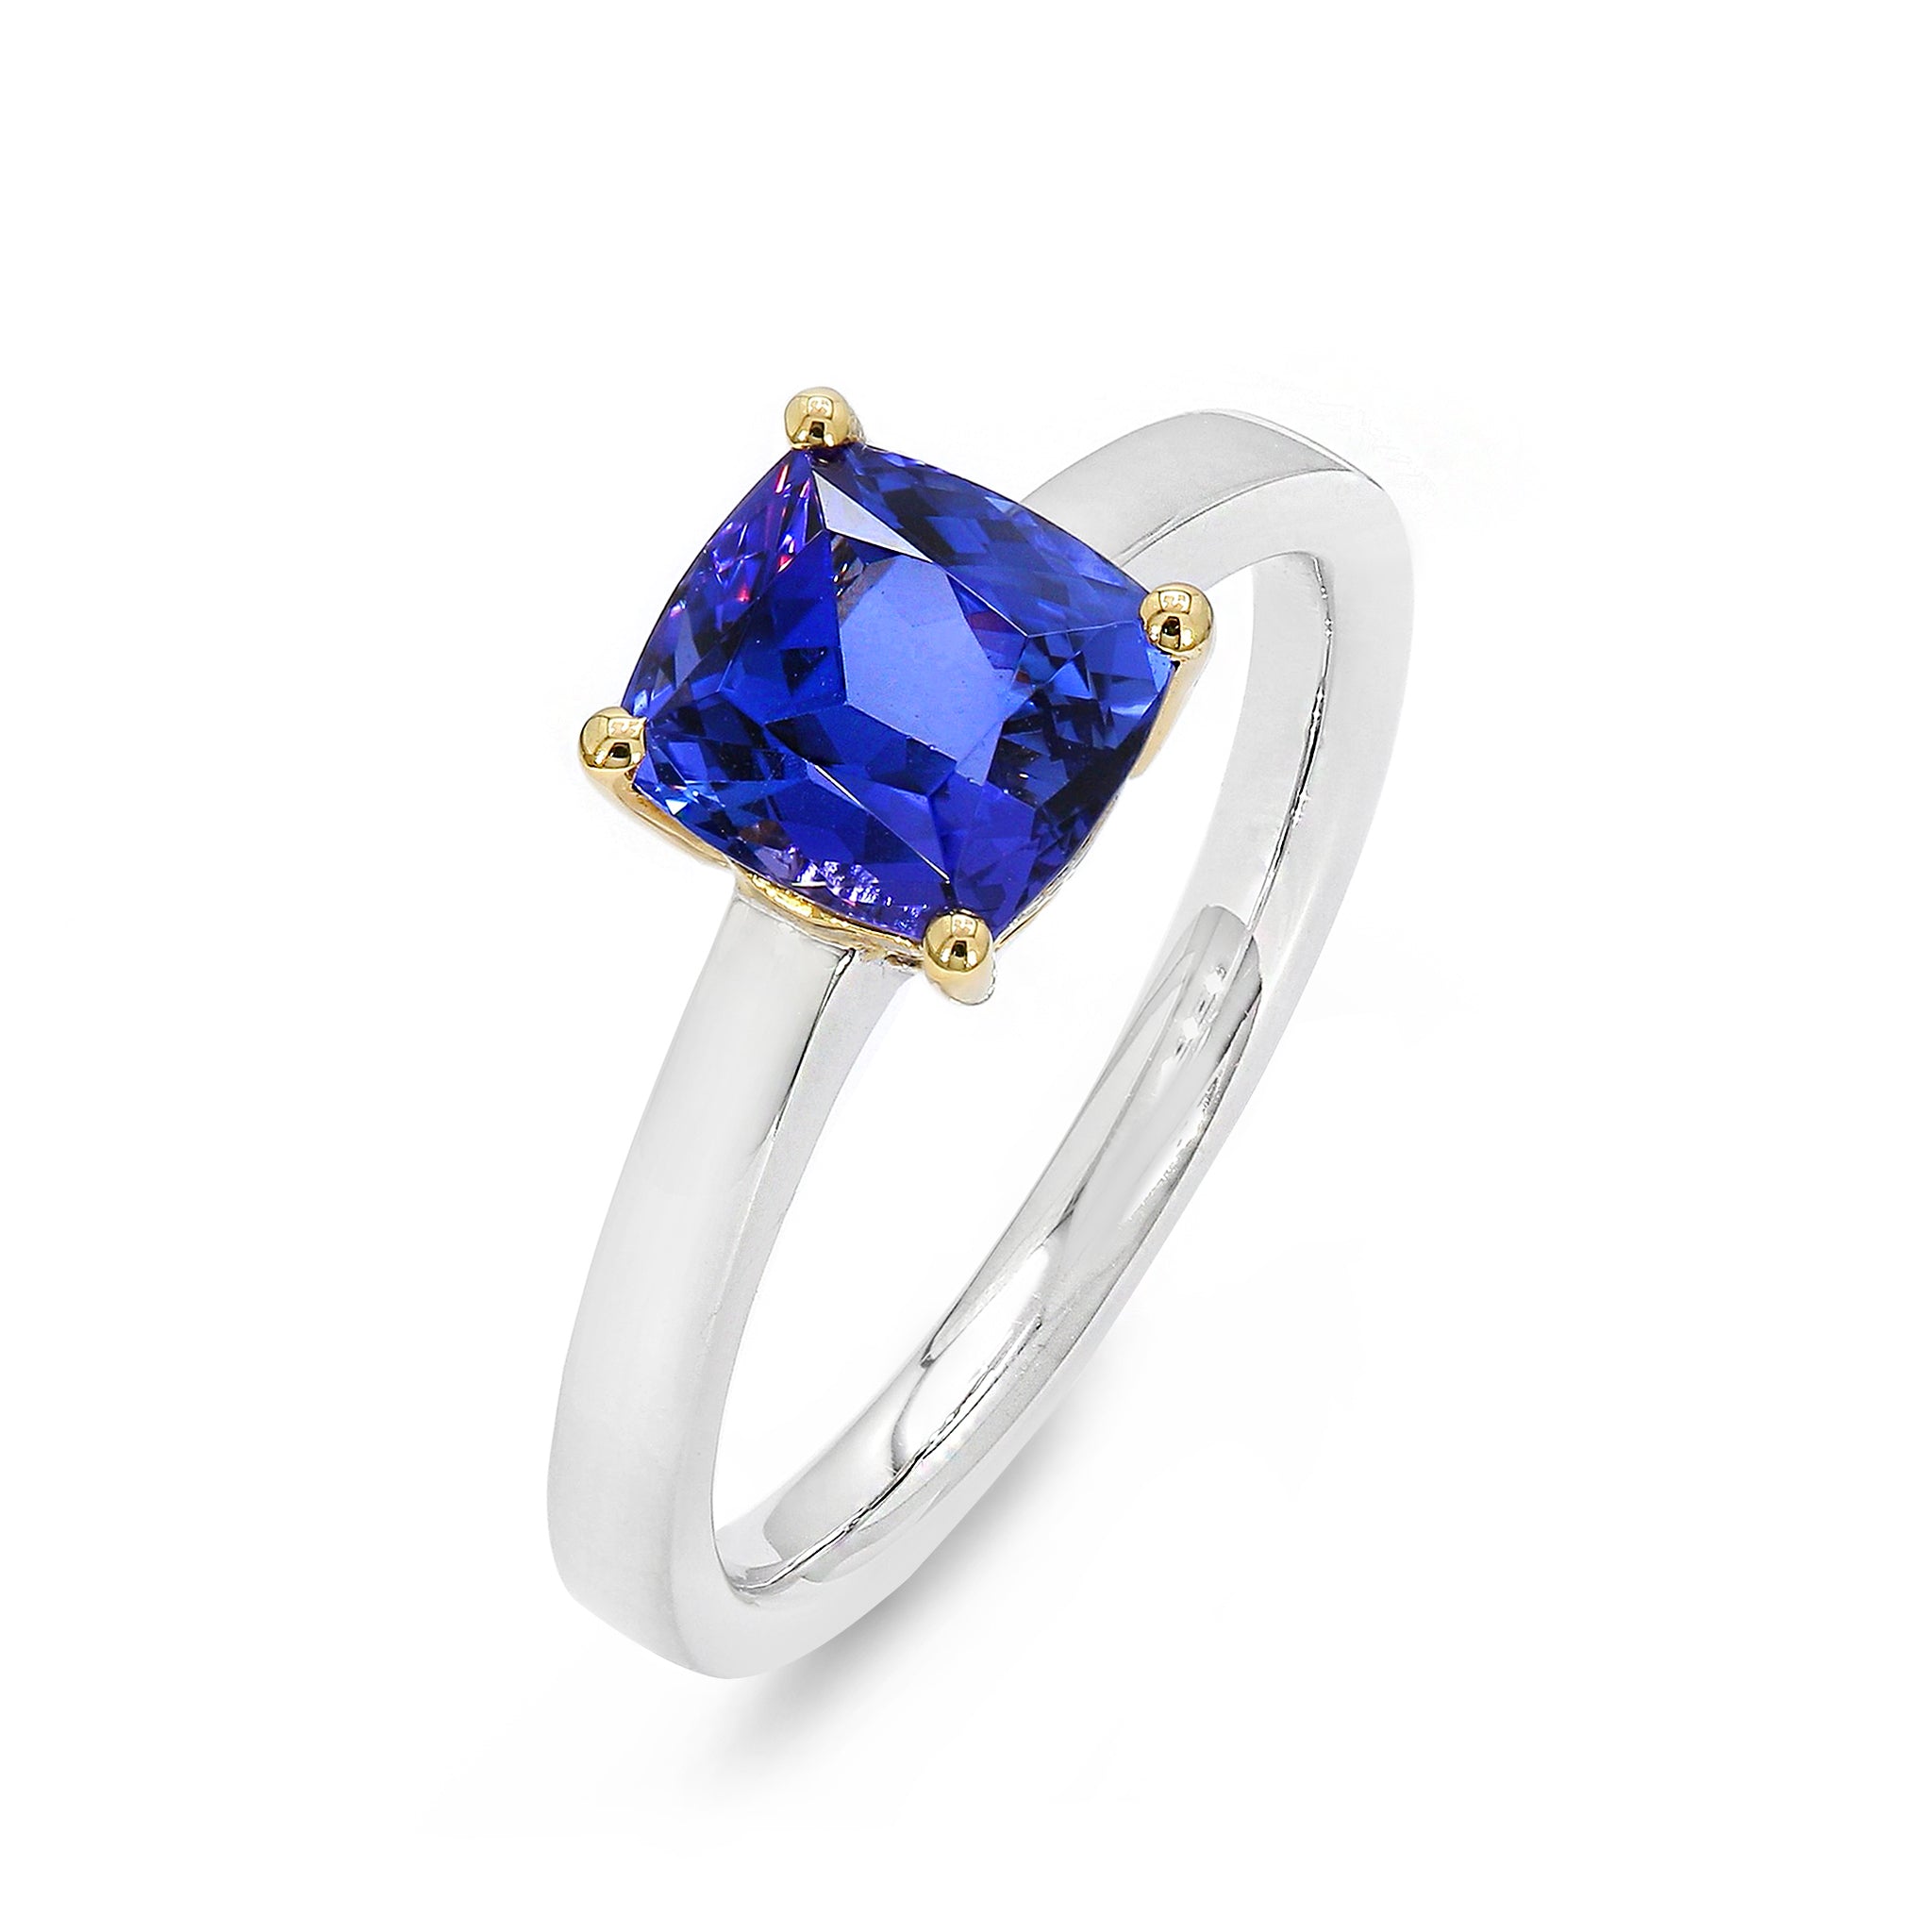 Shimansky - Tanzanite Cushion Cut Solitaire Ring 1.70ct crafted in 18K White and Yellow Gold